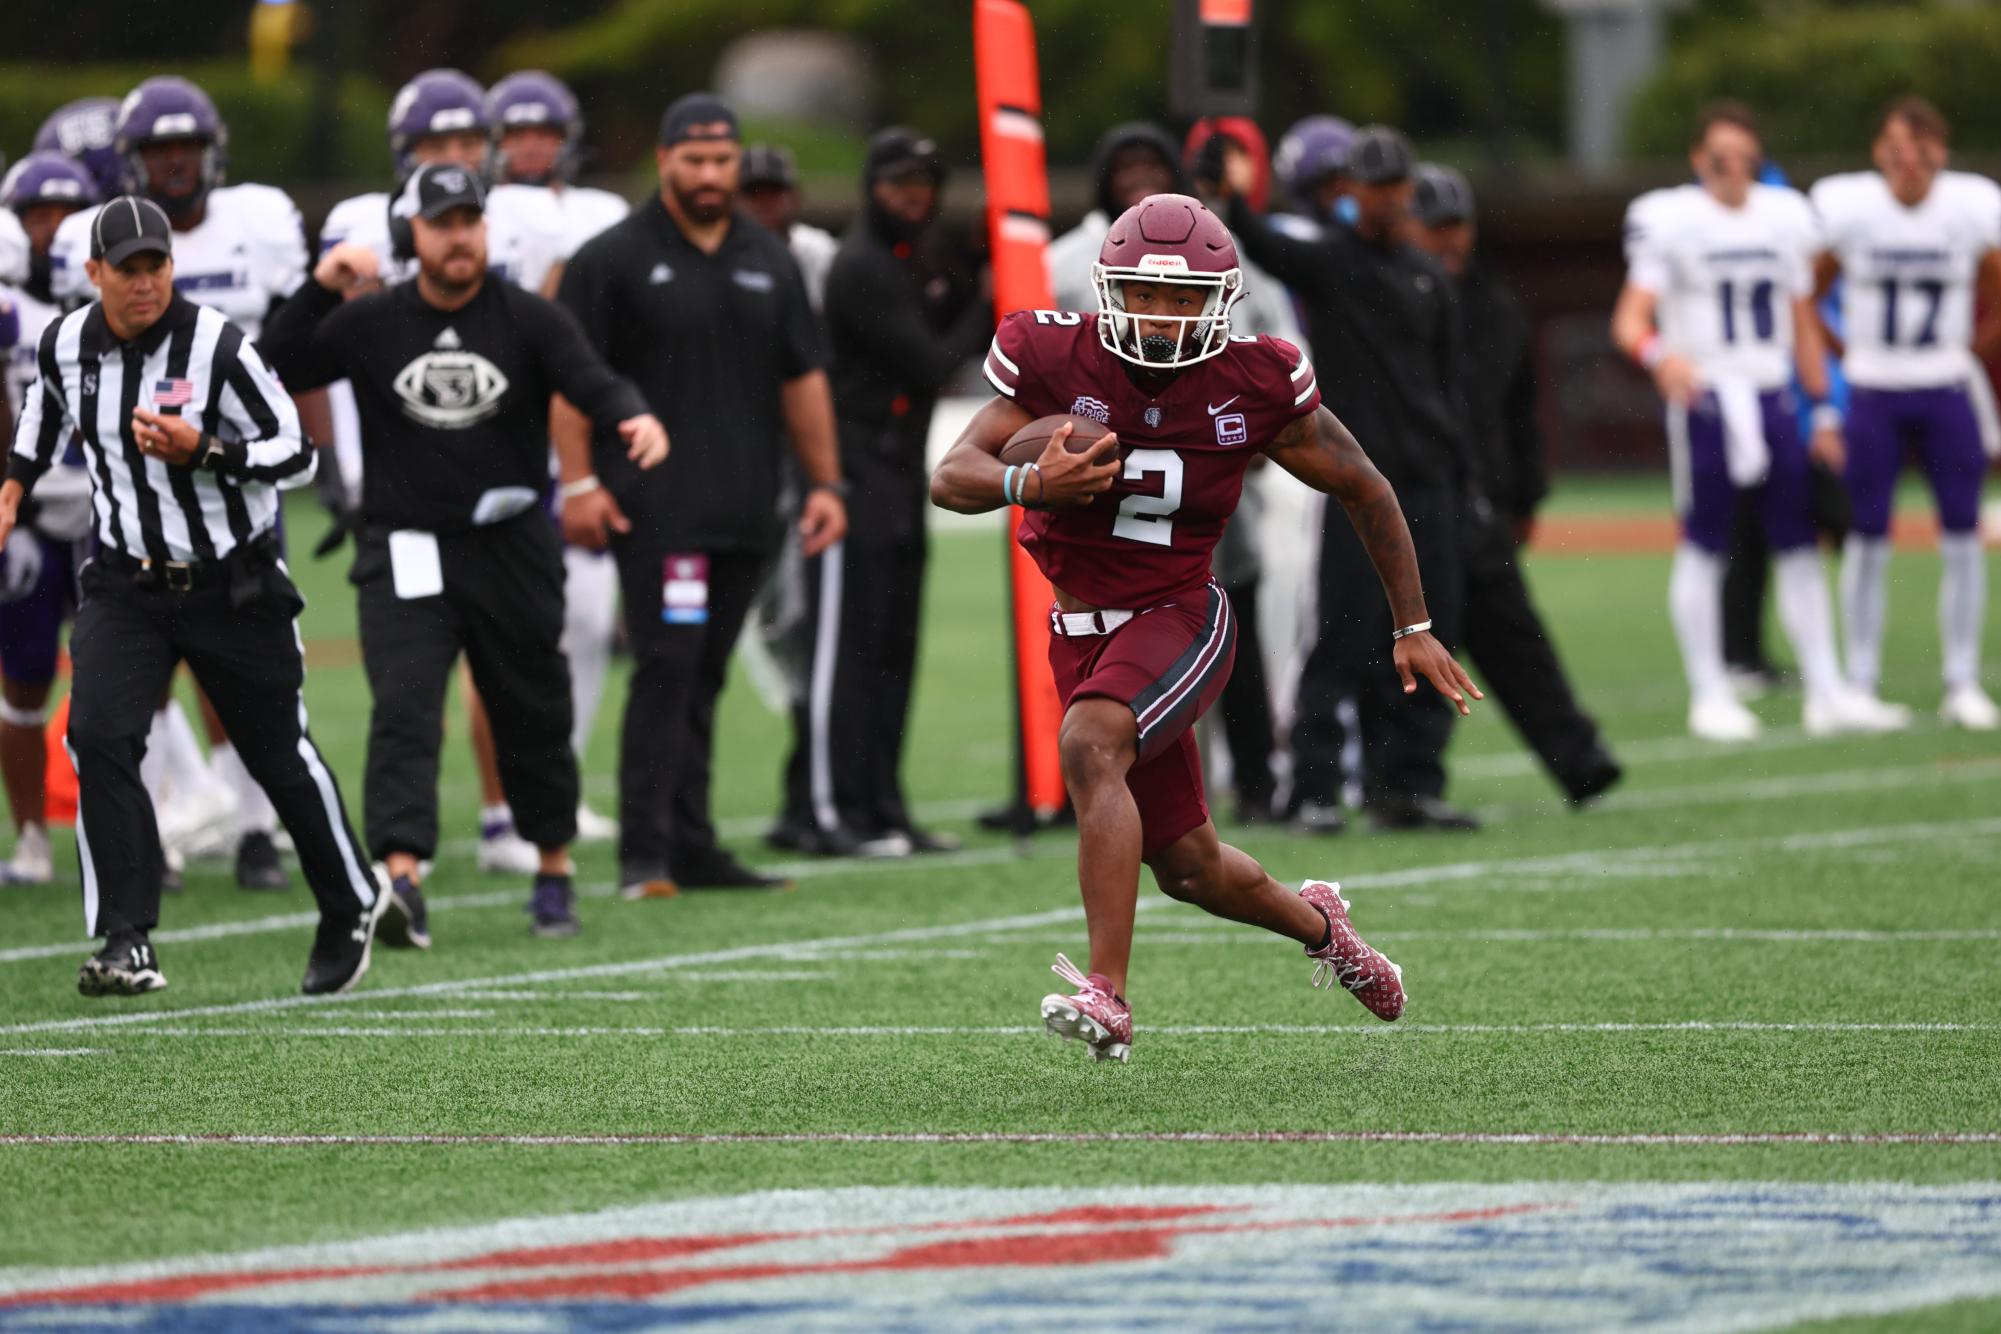 MJ Wright, GGSB ’24, sprints along the sideline while Stonehill players and coaches look on. He finished with three receptions for 58 yards and a touchdown.